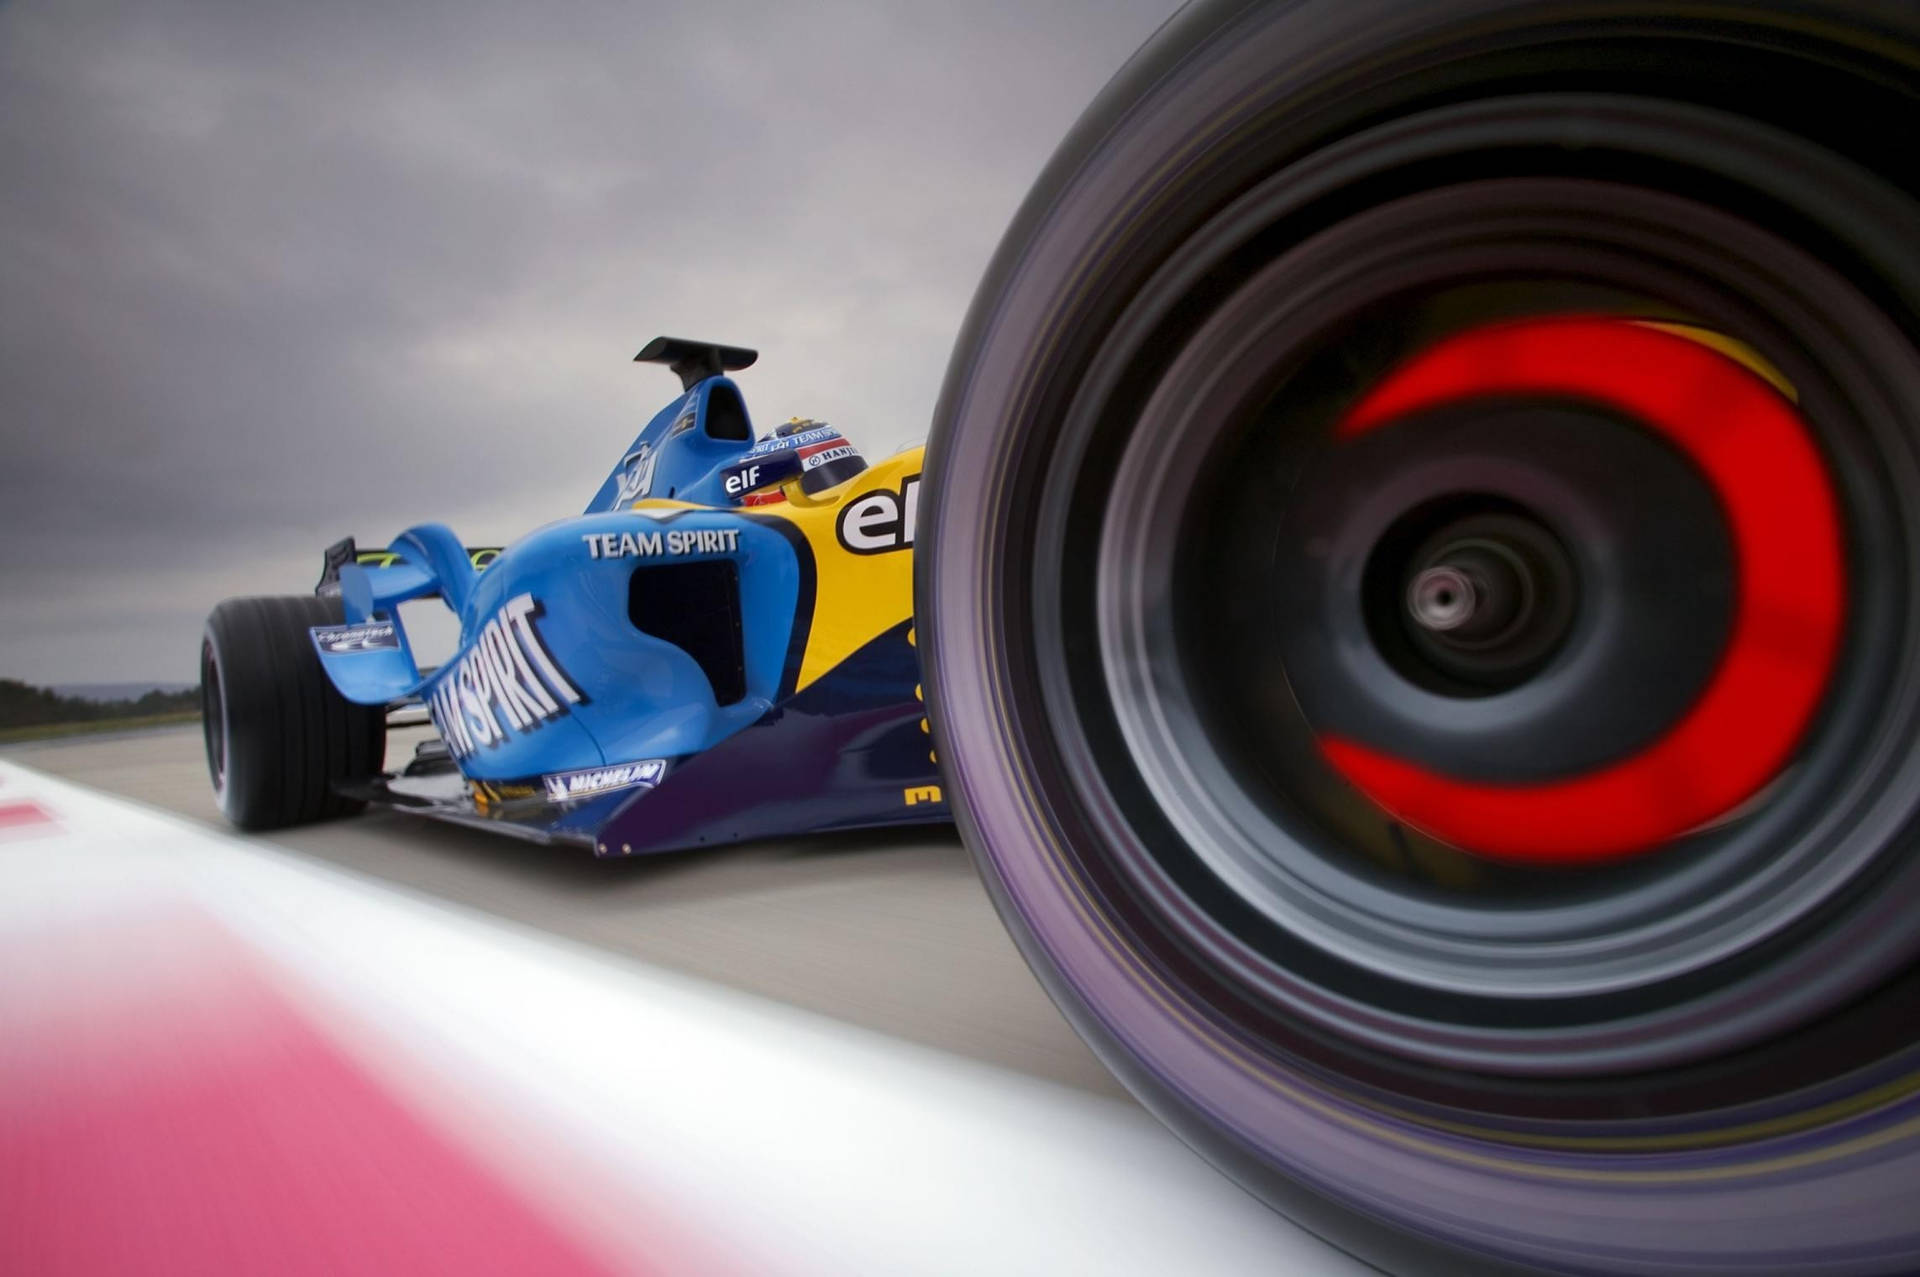 A Blue Racing Car With Red Wheels On The Track Background